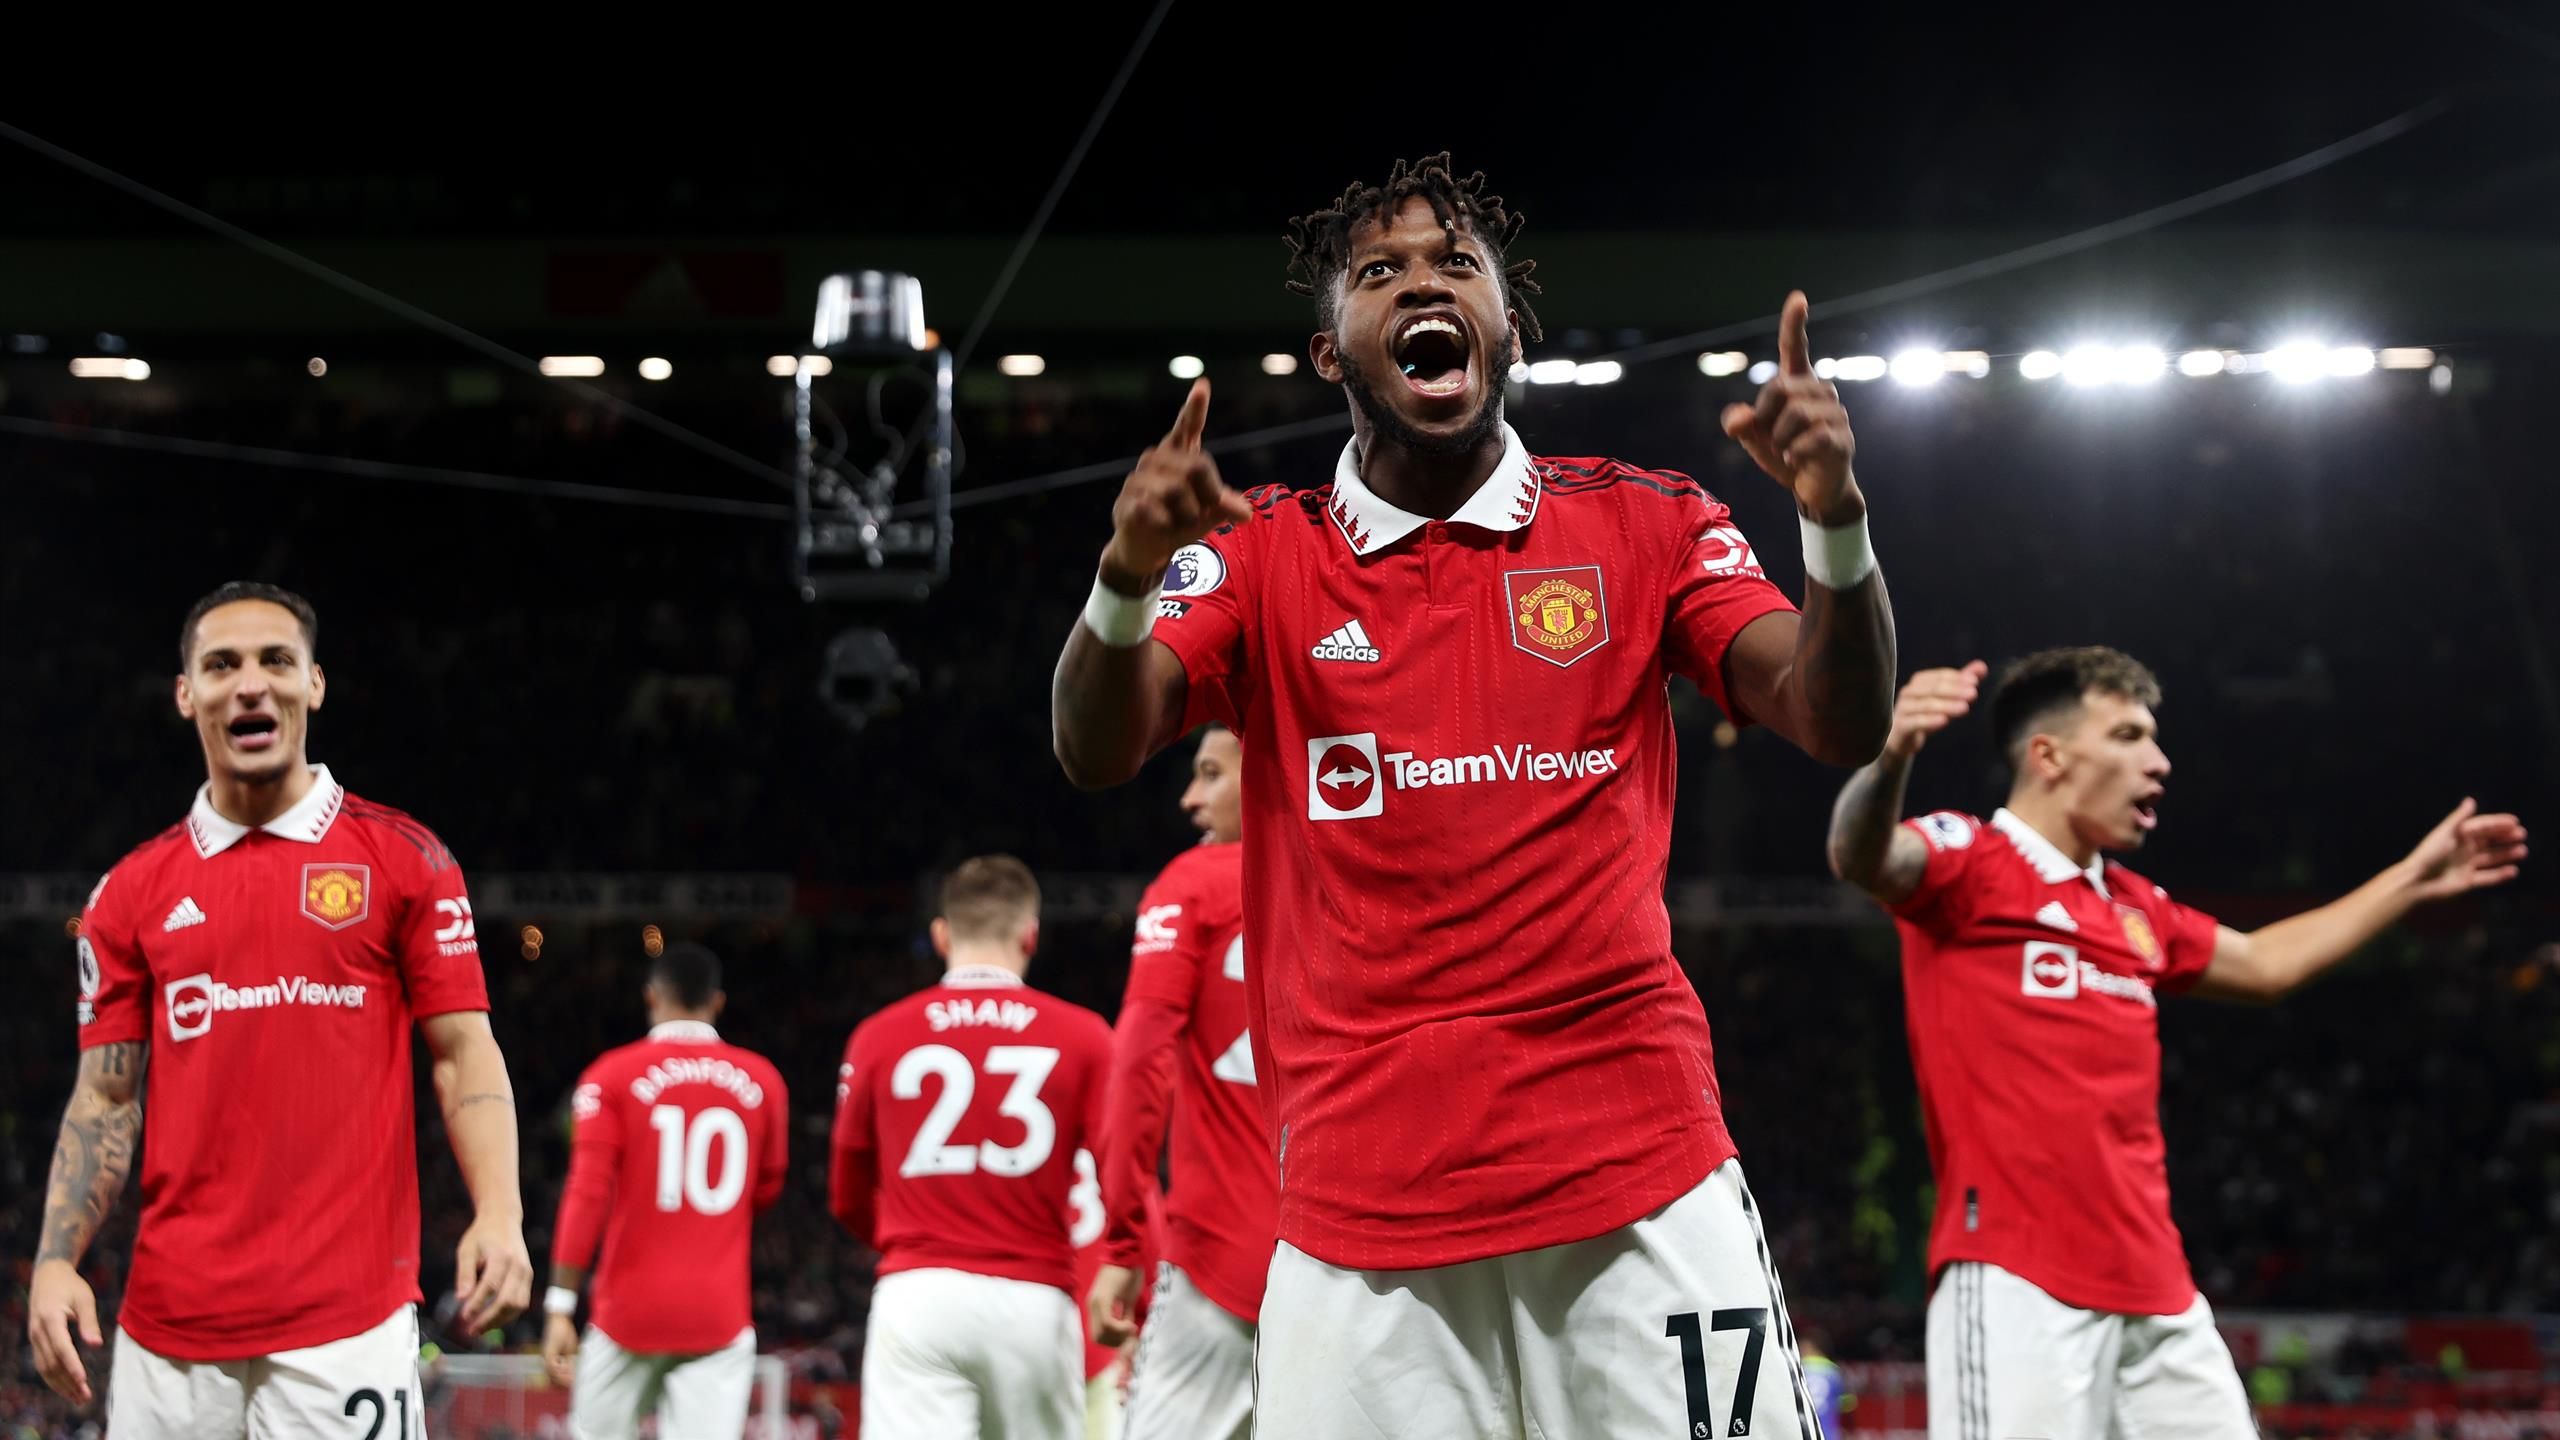 Manchester United 2-0 Tottenham Fred and Bruno Fernandes score as Utd beat tame Spurs at Old Trafford